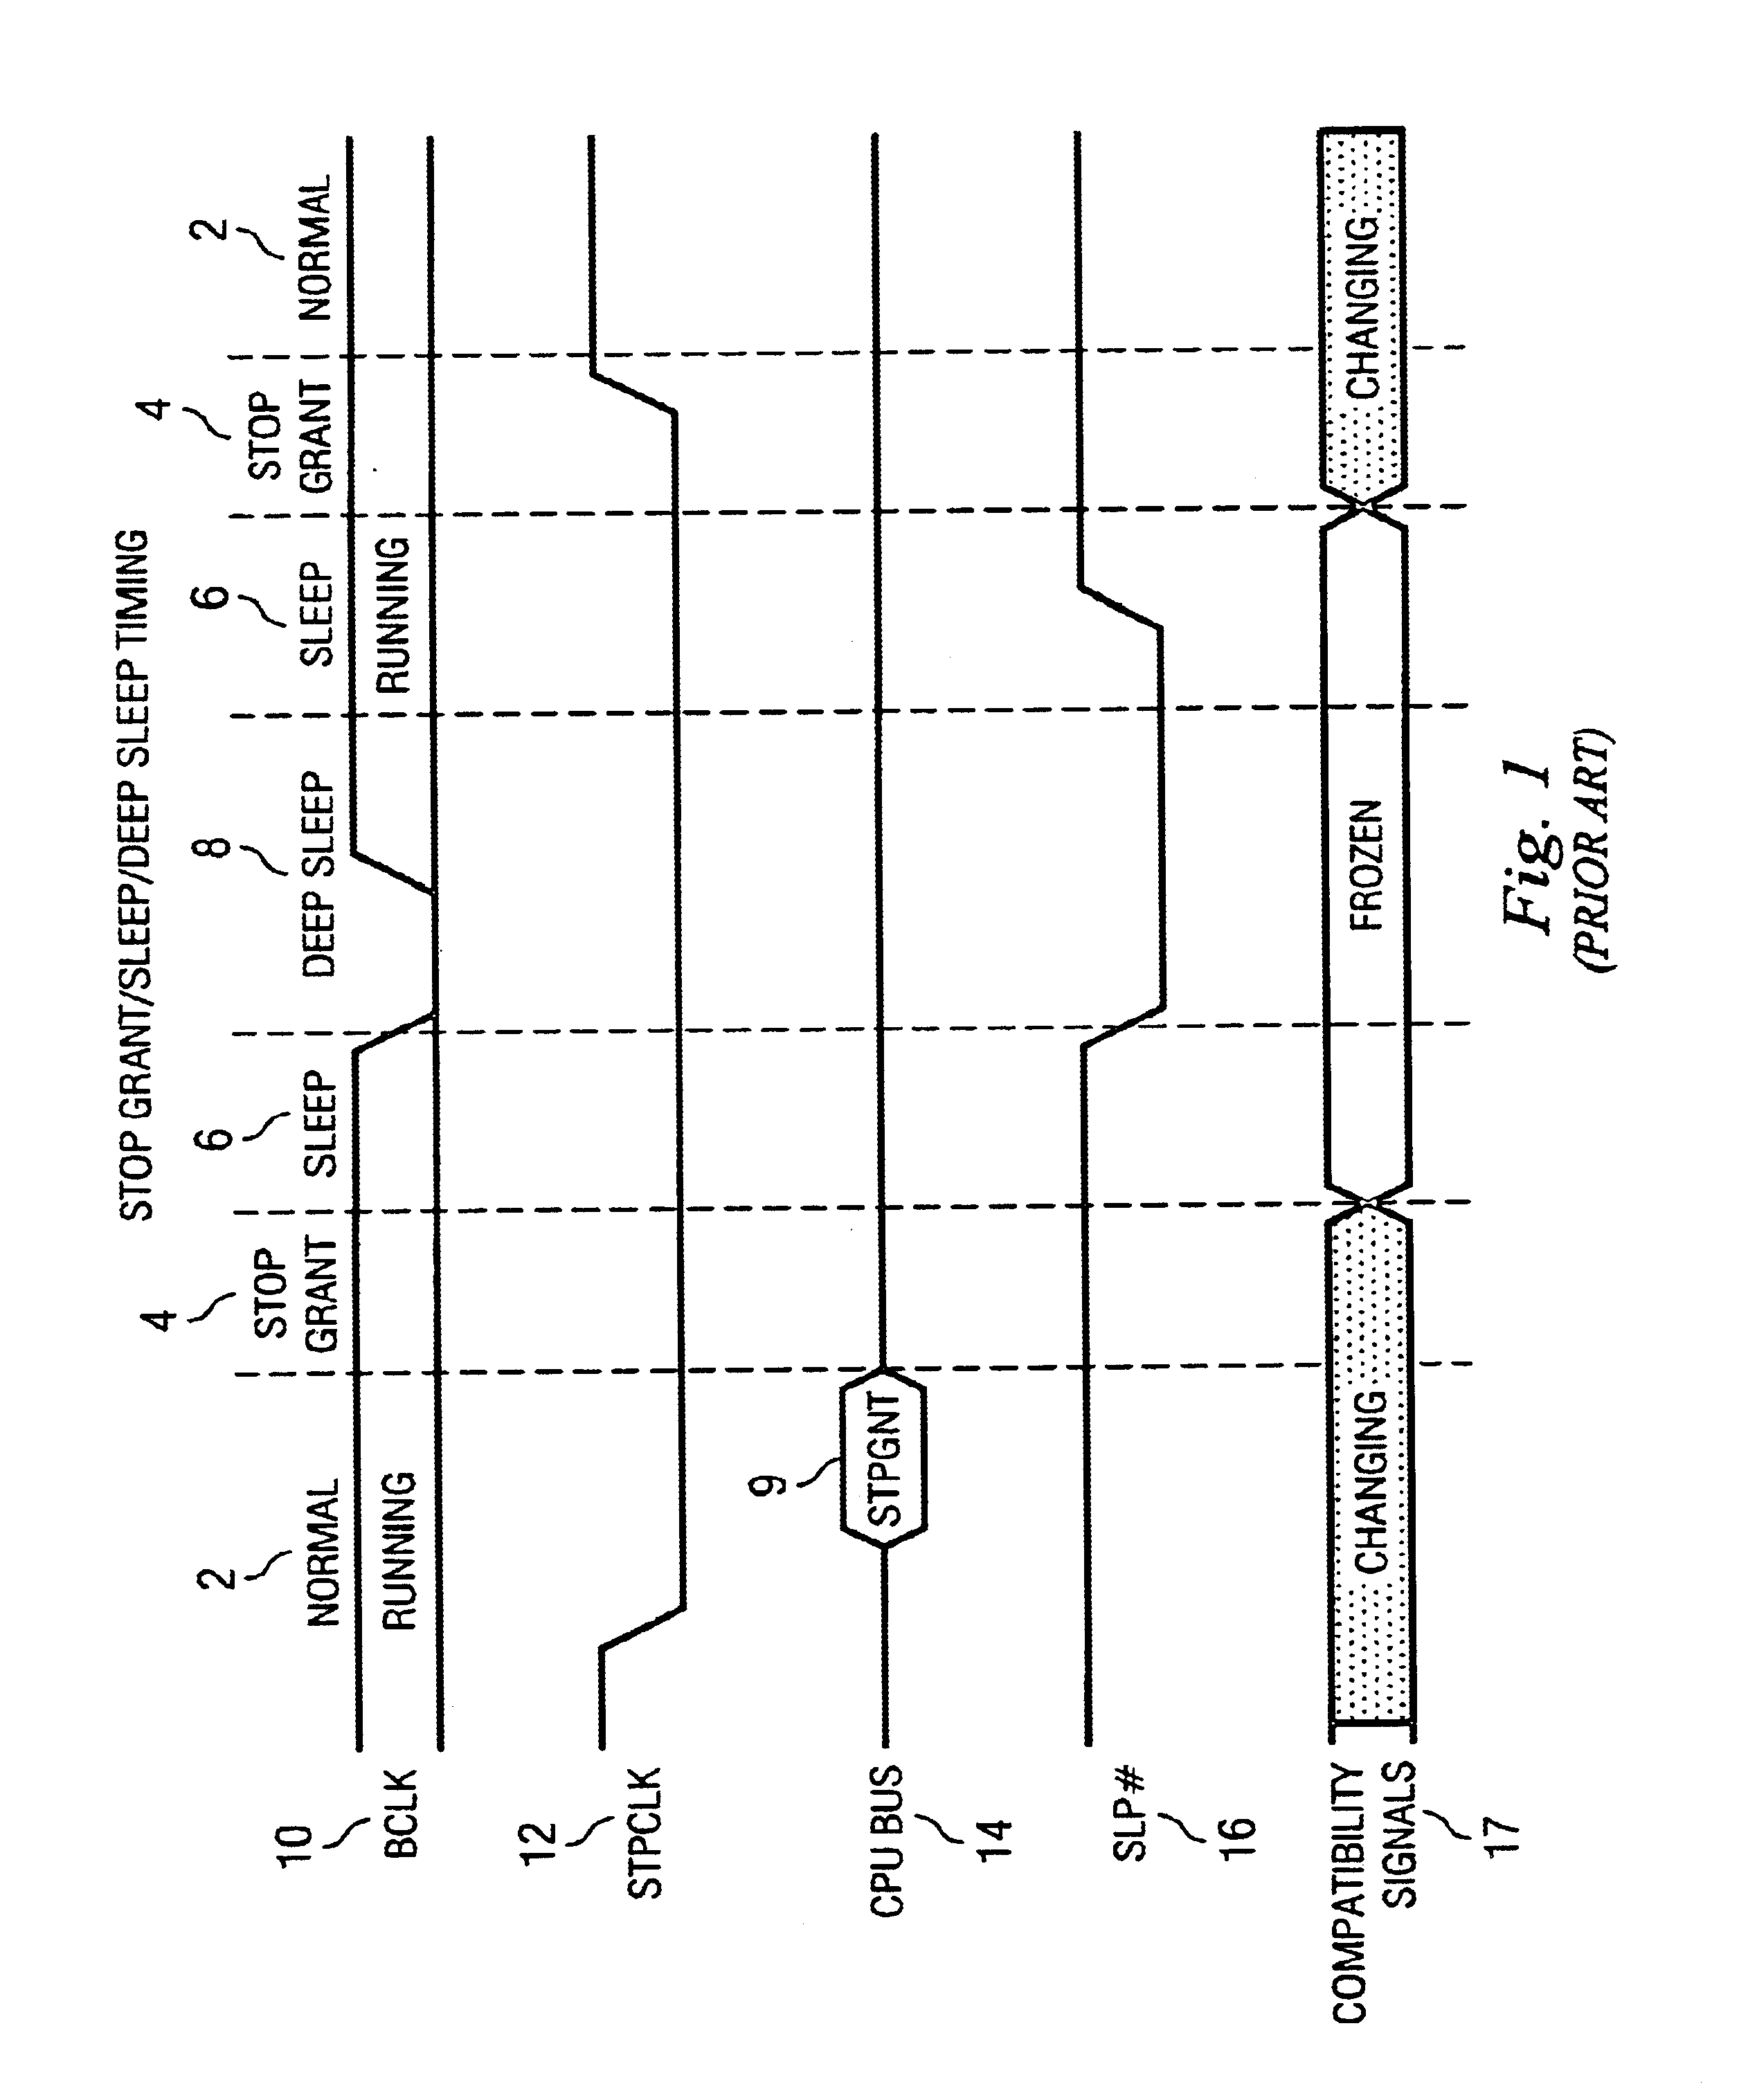 Processor power state transistions using separate logic control